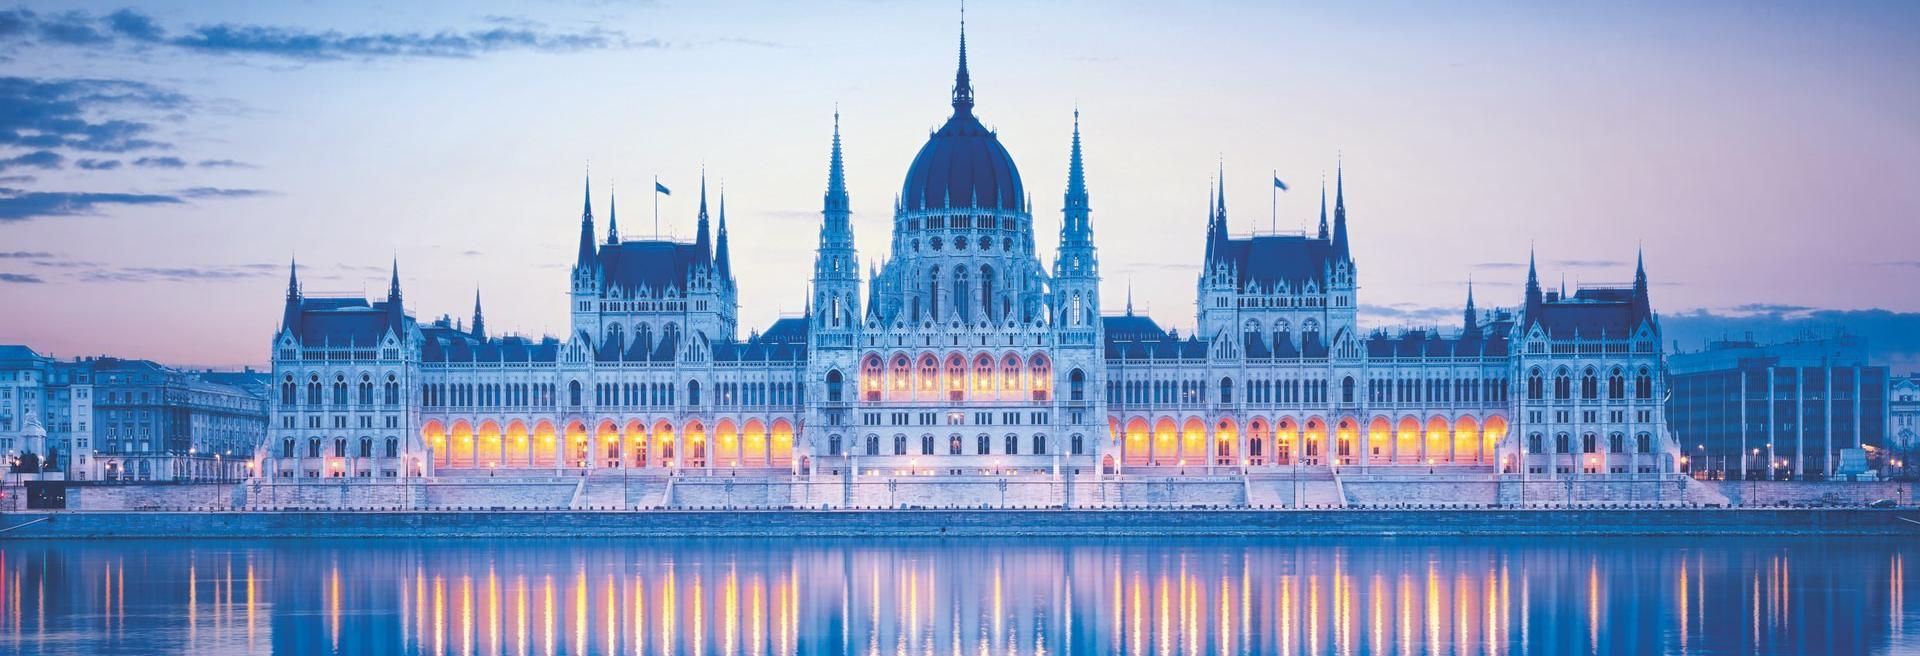 Hungary among the most important investment locations of the world again